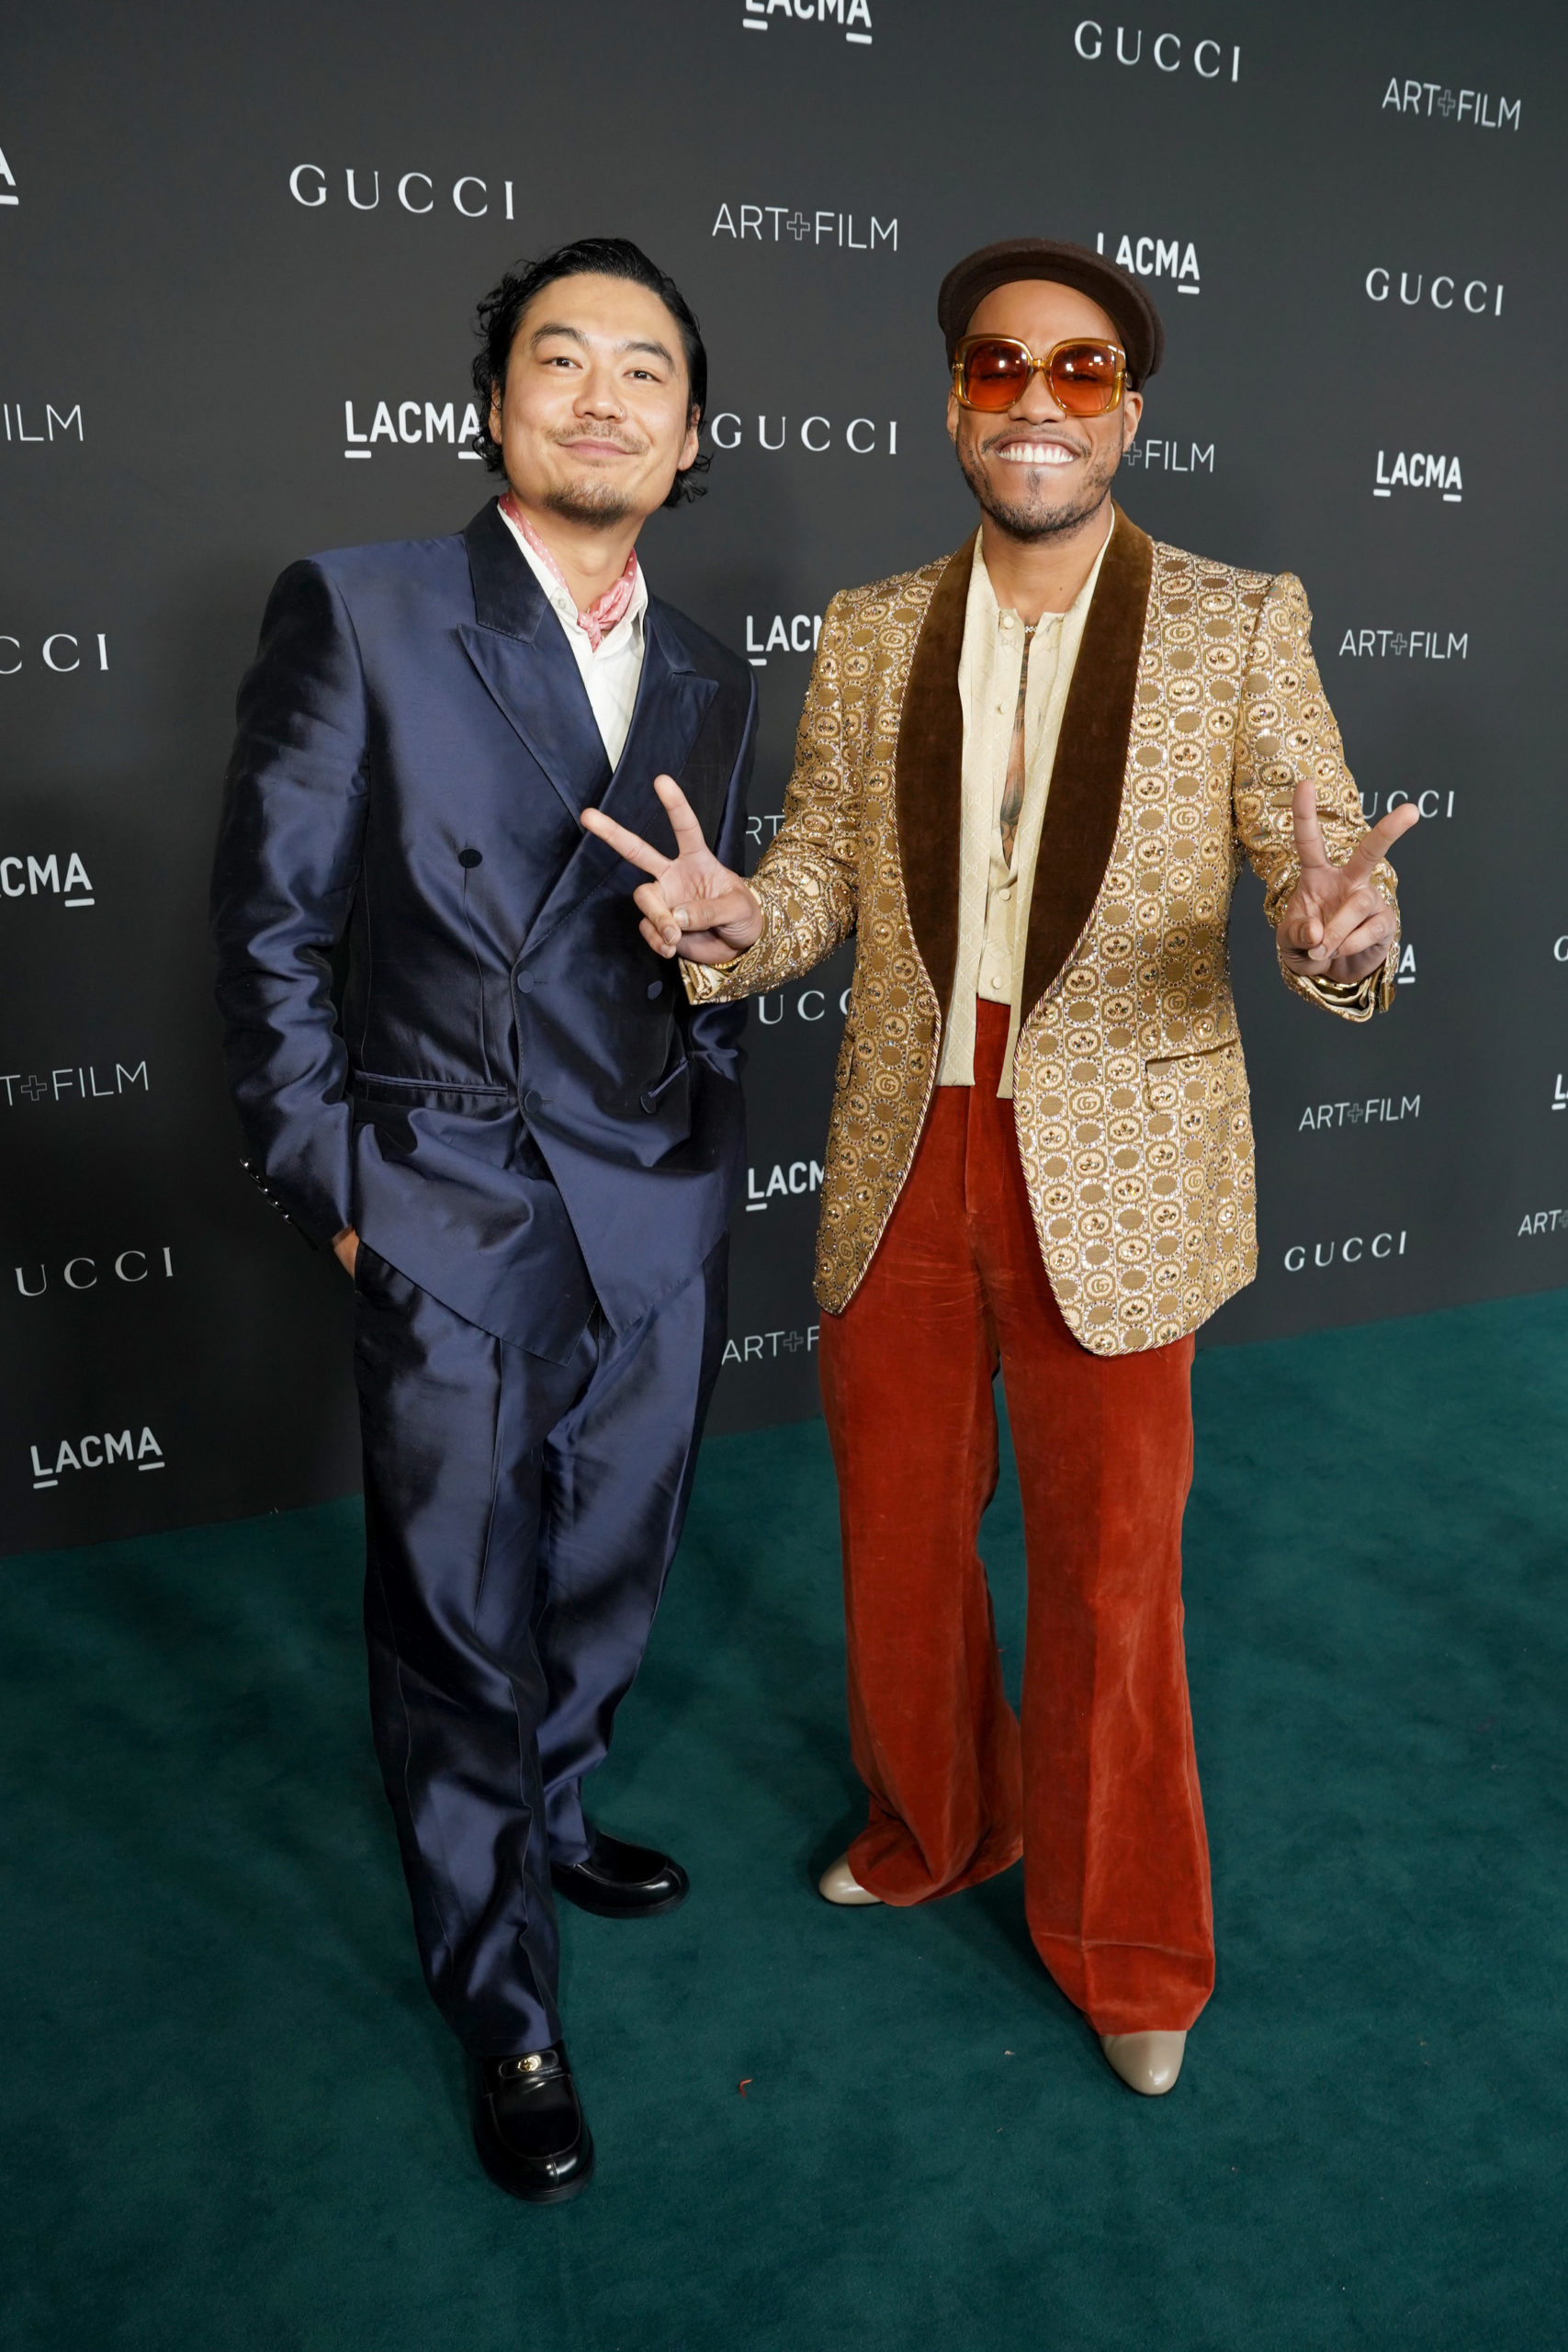  LOS ANGELES, CALIFORNIA - NOVEMBER 06: (L-R) Dumbfoundead, wearing Gucci, and Anderson .Paak, wearing Gucci, attend the 10th Annual LACMA ART+FILM GALA honoring Amy Sherald, Kehinde Wiley, and Steven Spielberg presented by Gucci at Los Angeles County Museum of Art on November 06, 2021 in Los Angeles, California. (Photo by Presley Ann/Getty Images for LACMA)